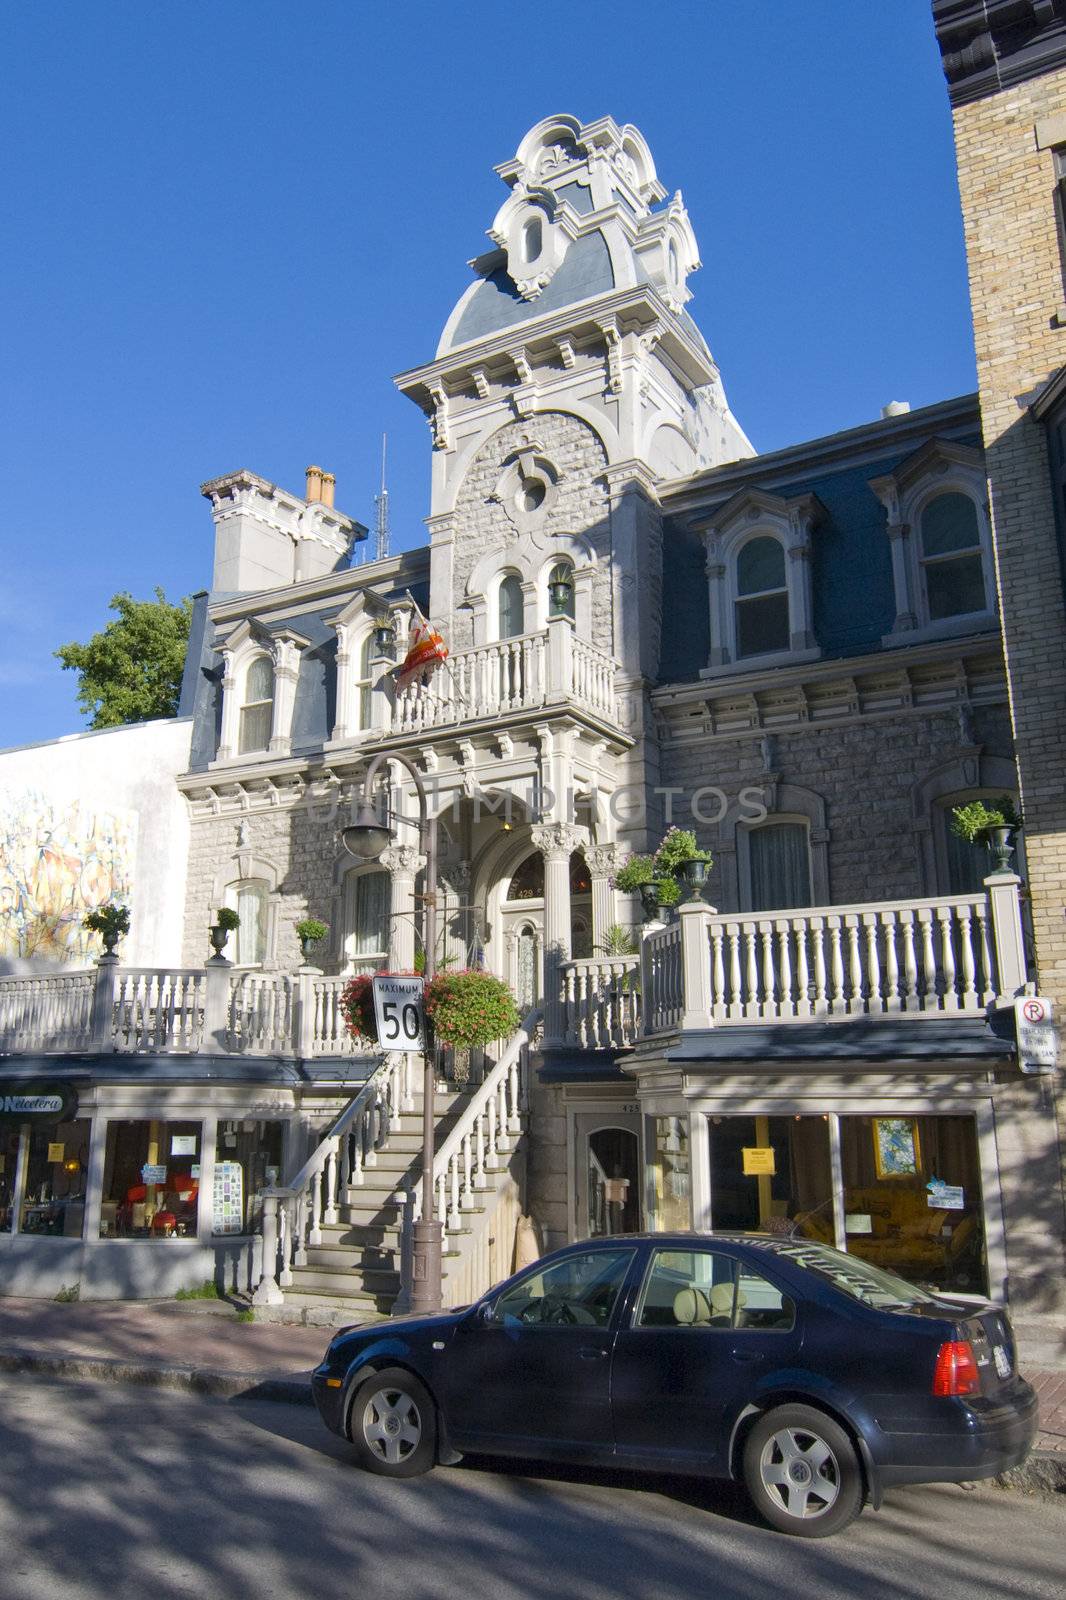 A white house in a typical Quebec street